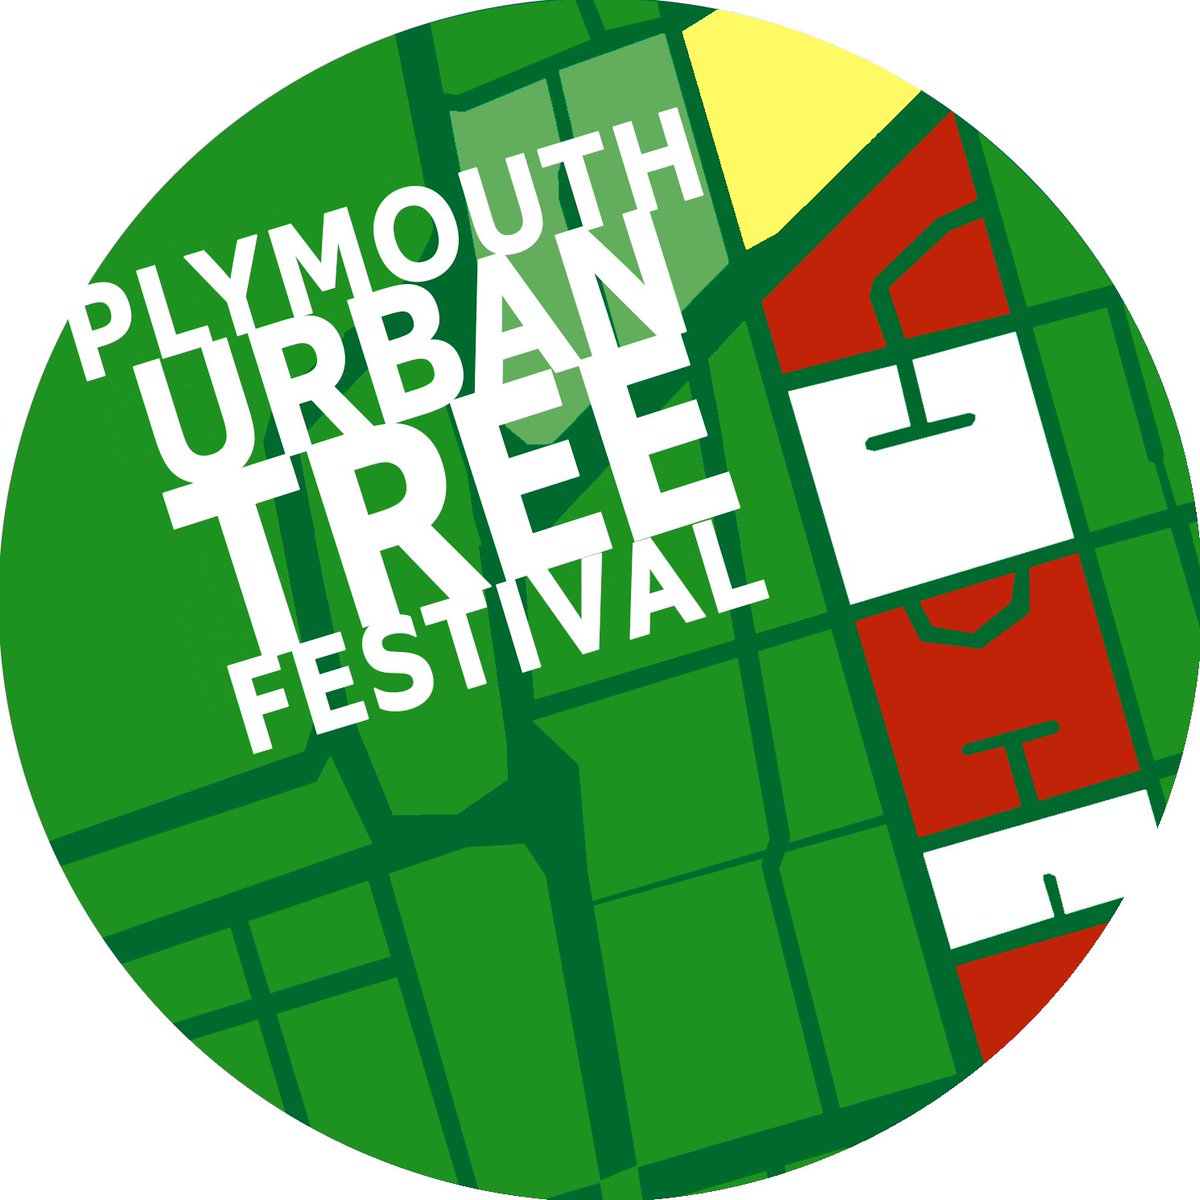 Lots of the events for this year's Plymouth Urban Tree Festival are now up on their website. So much going on over the 9 day, May 11th to 19th. Something for everyone and all free or subsidised to help make it affordable! Details here! plymouthurbantreefestival.com #jannerslovetrees